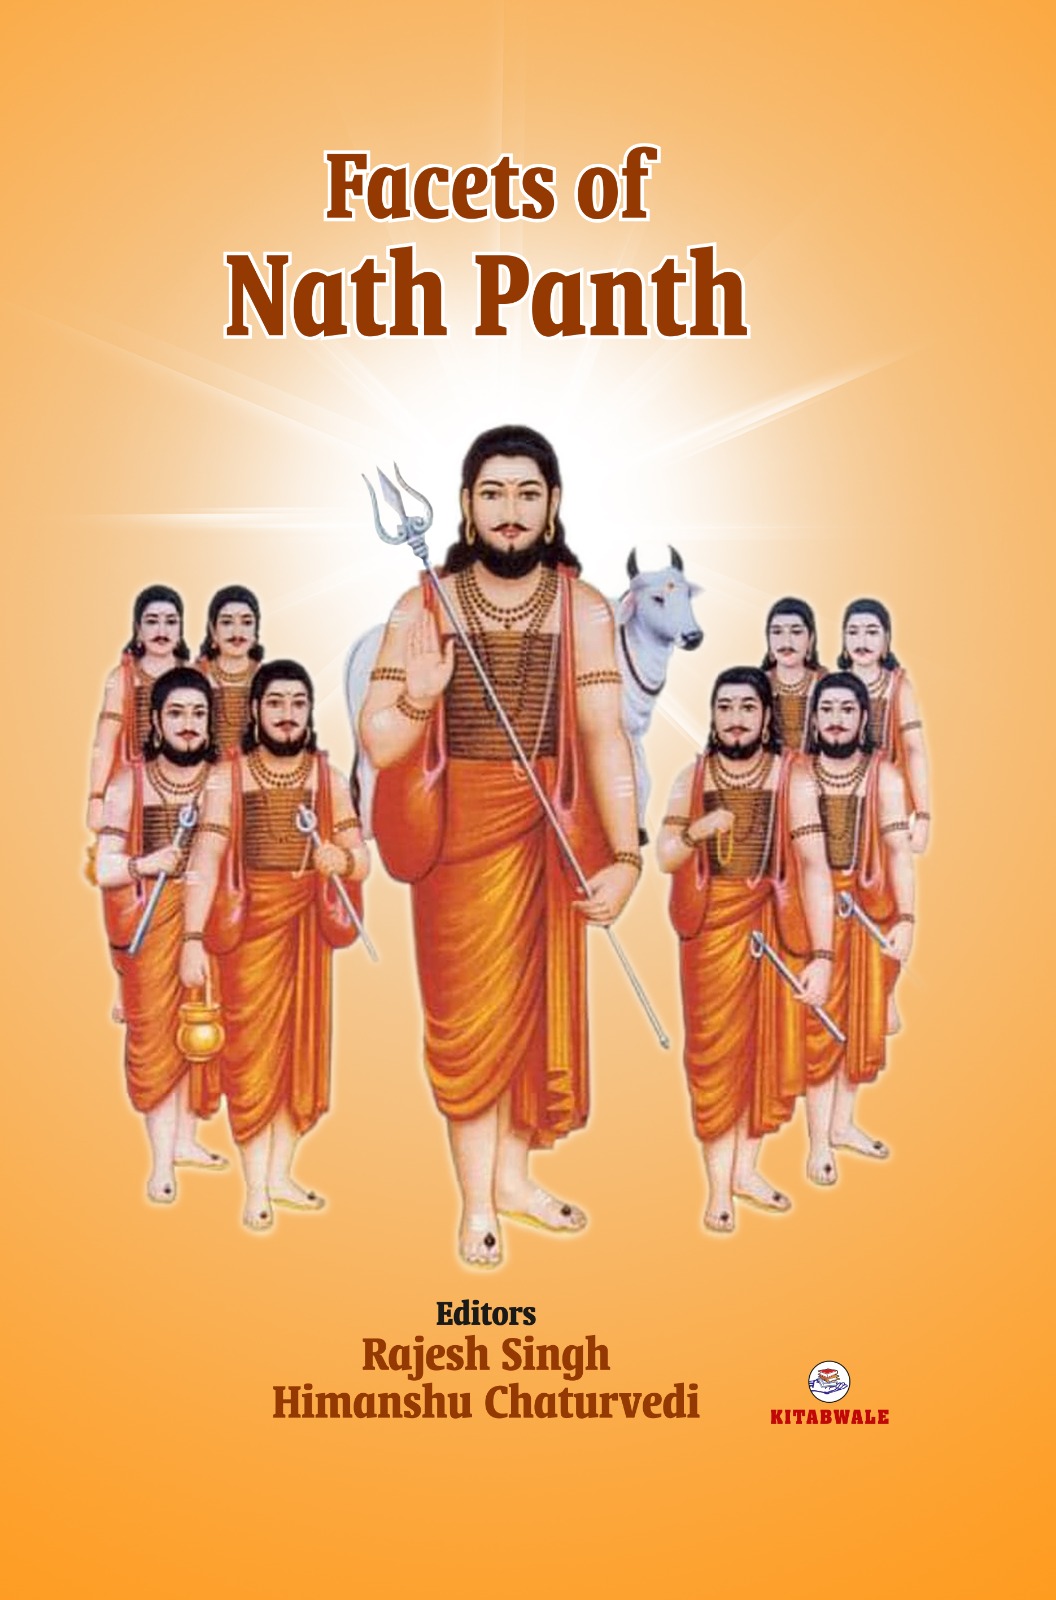 Facets of Nath Panth